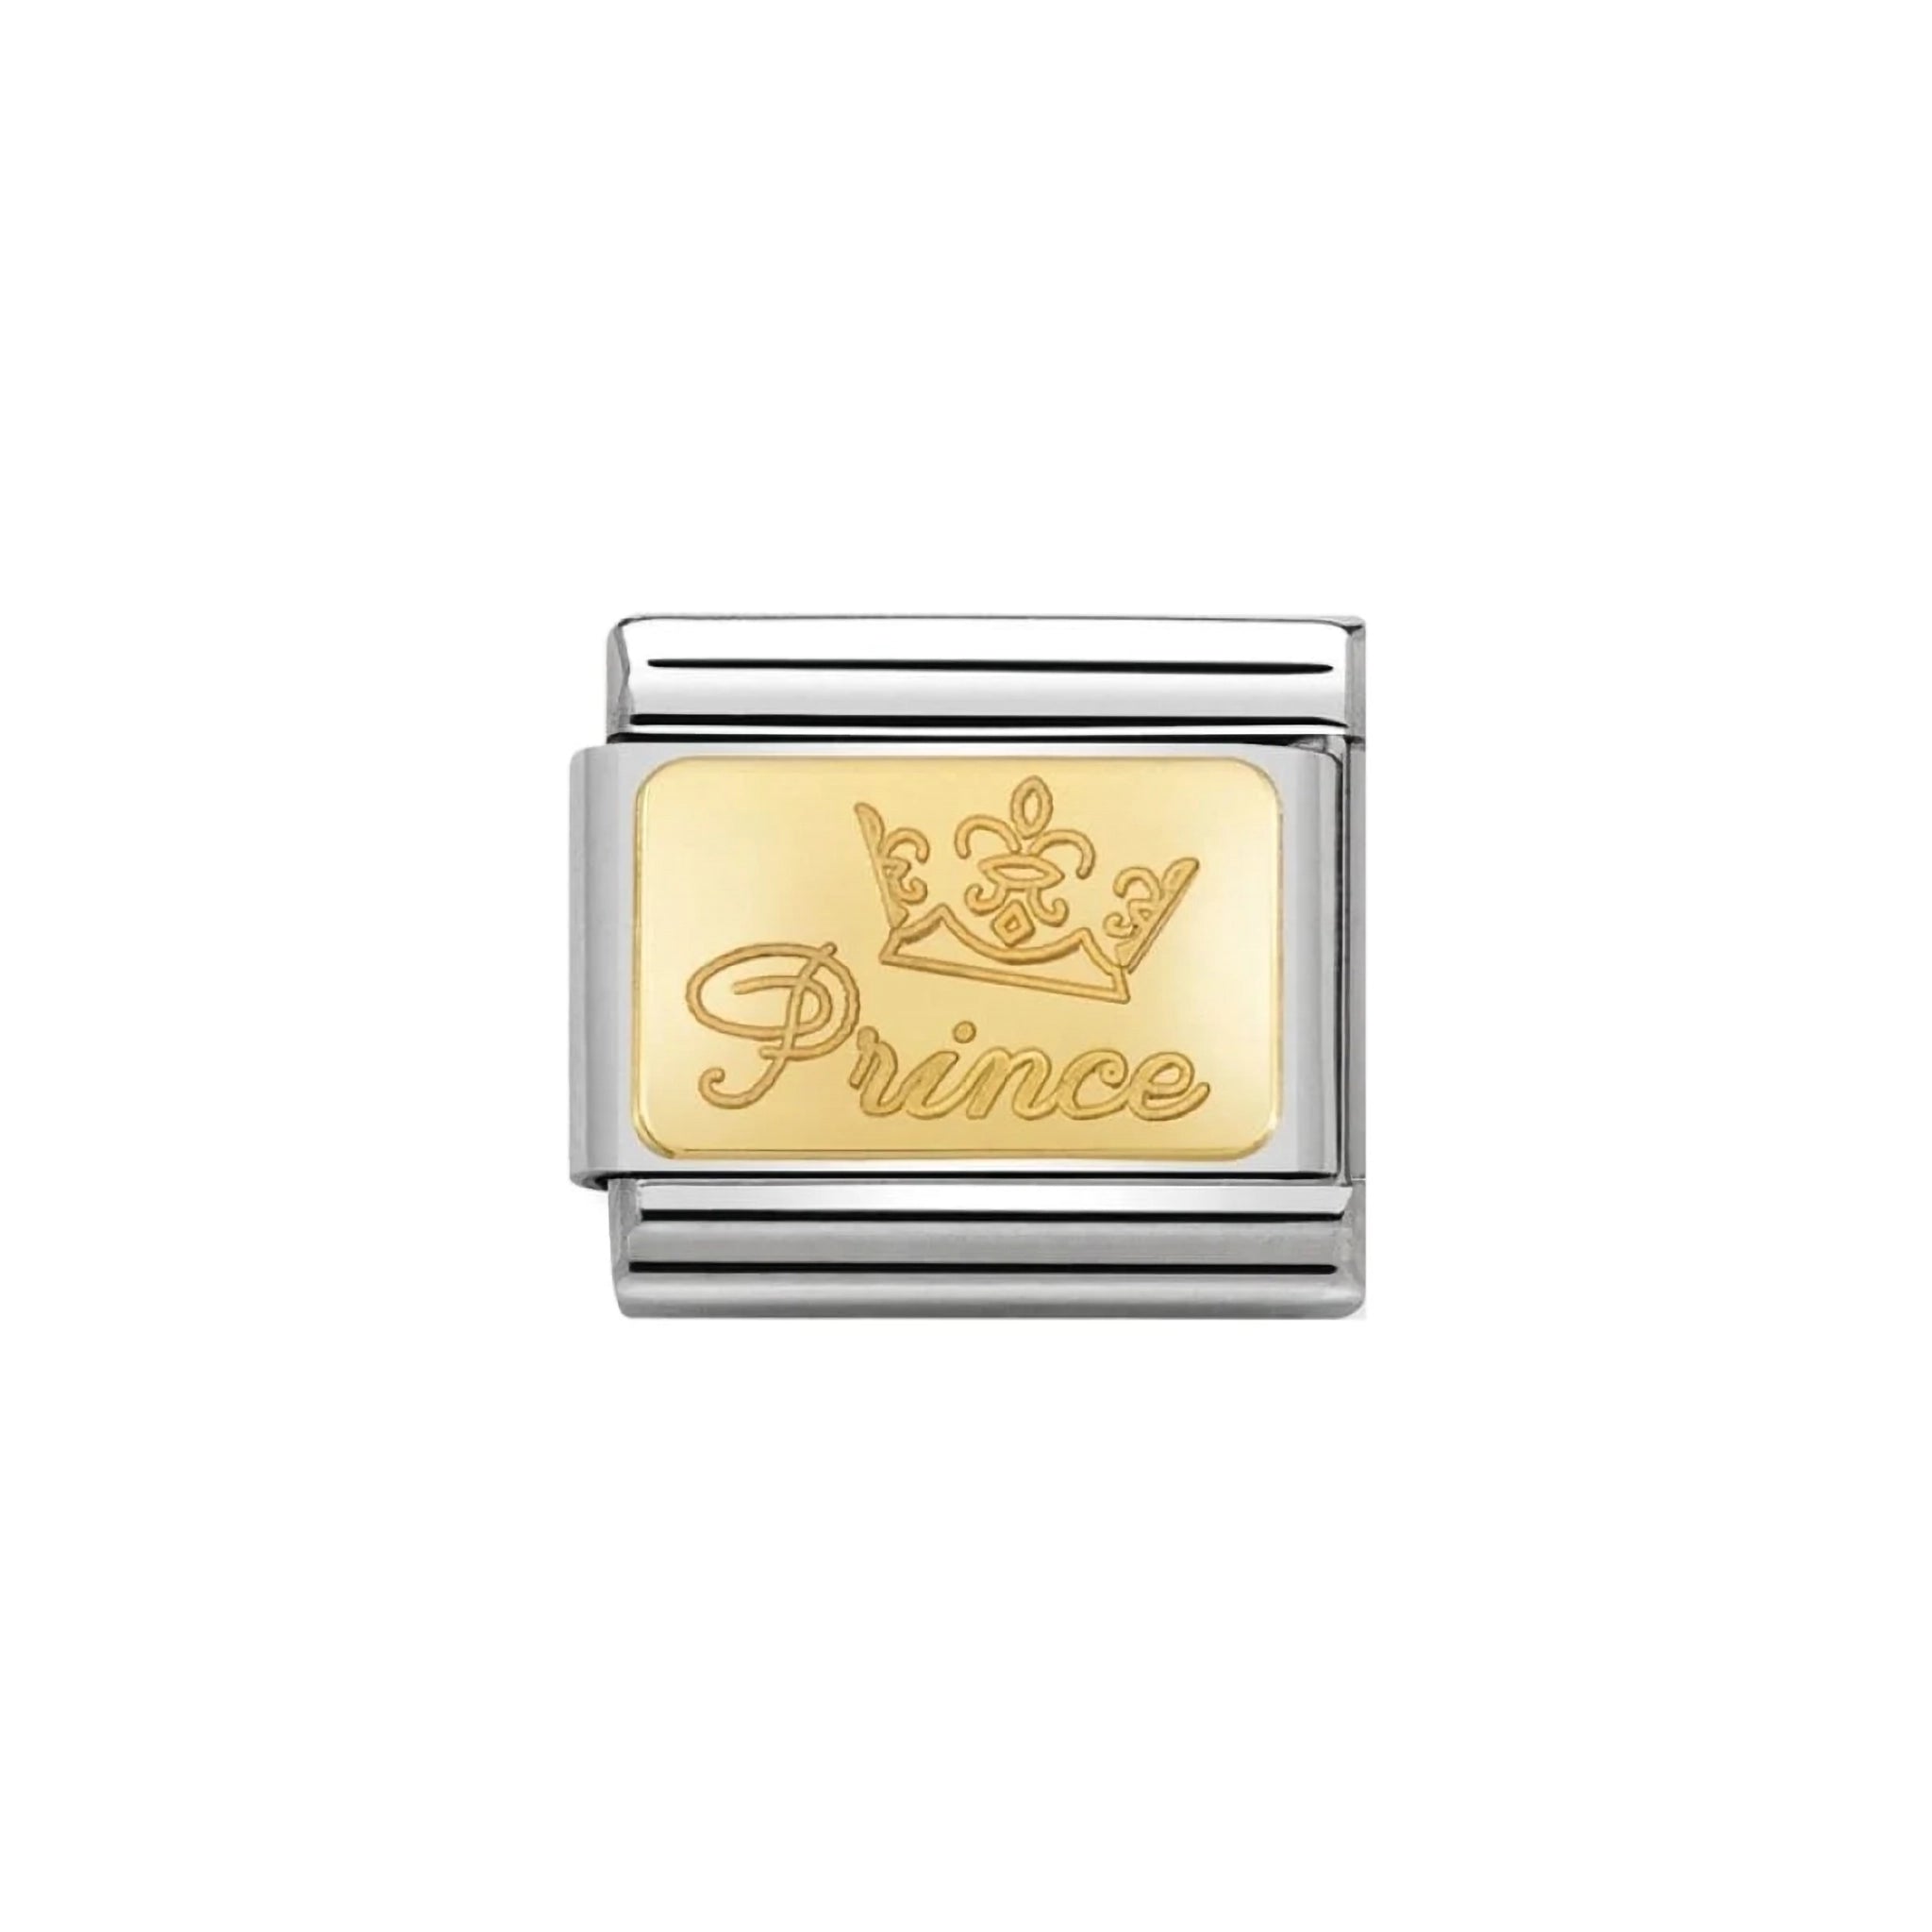 A Nomination charm link featuring a gold plaque engraved with 'prince' and a crown